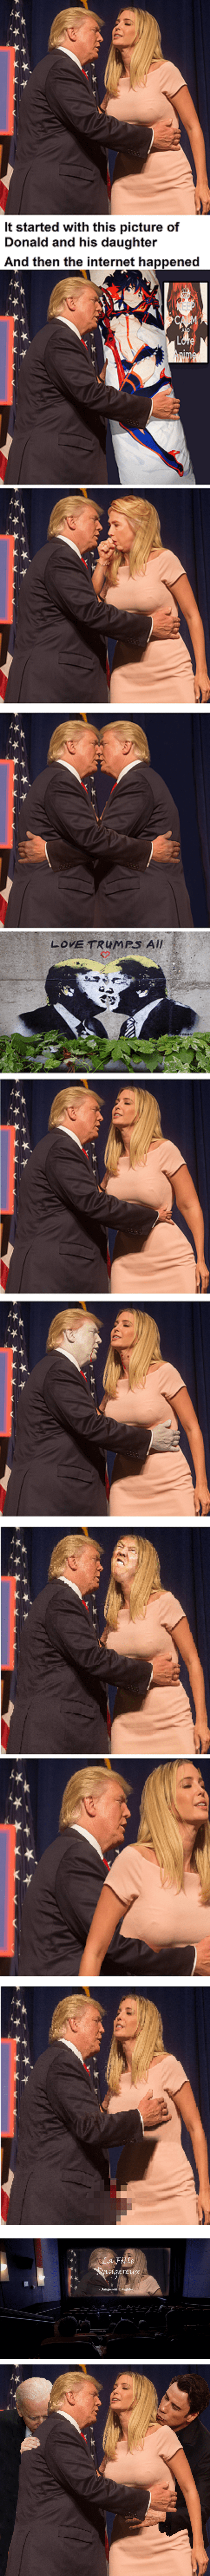 Trump and his daughter